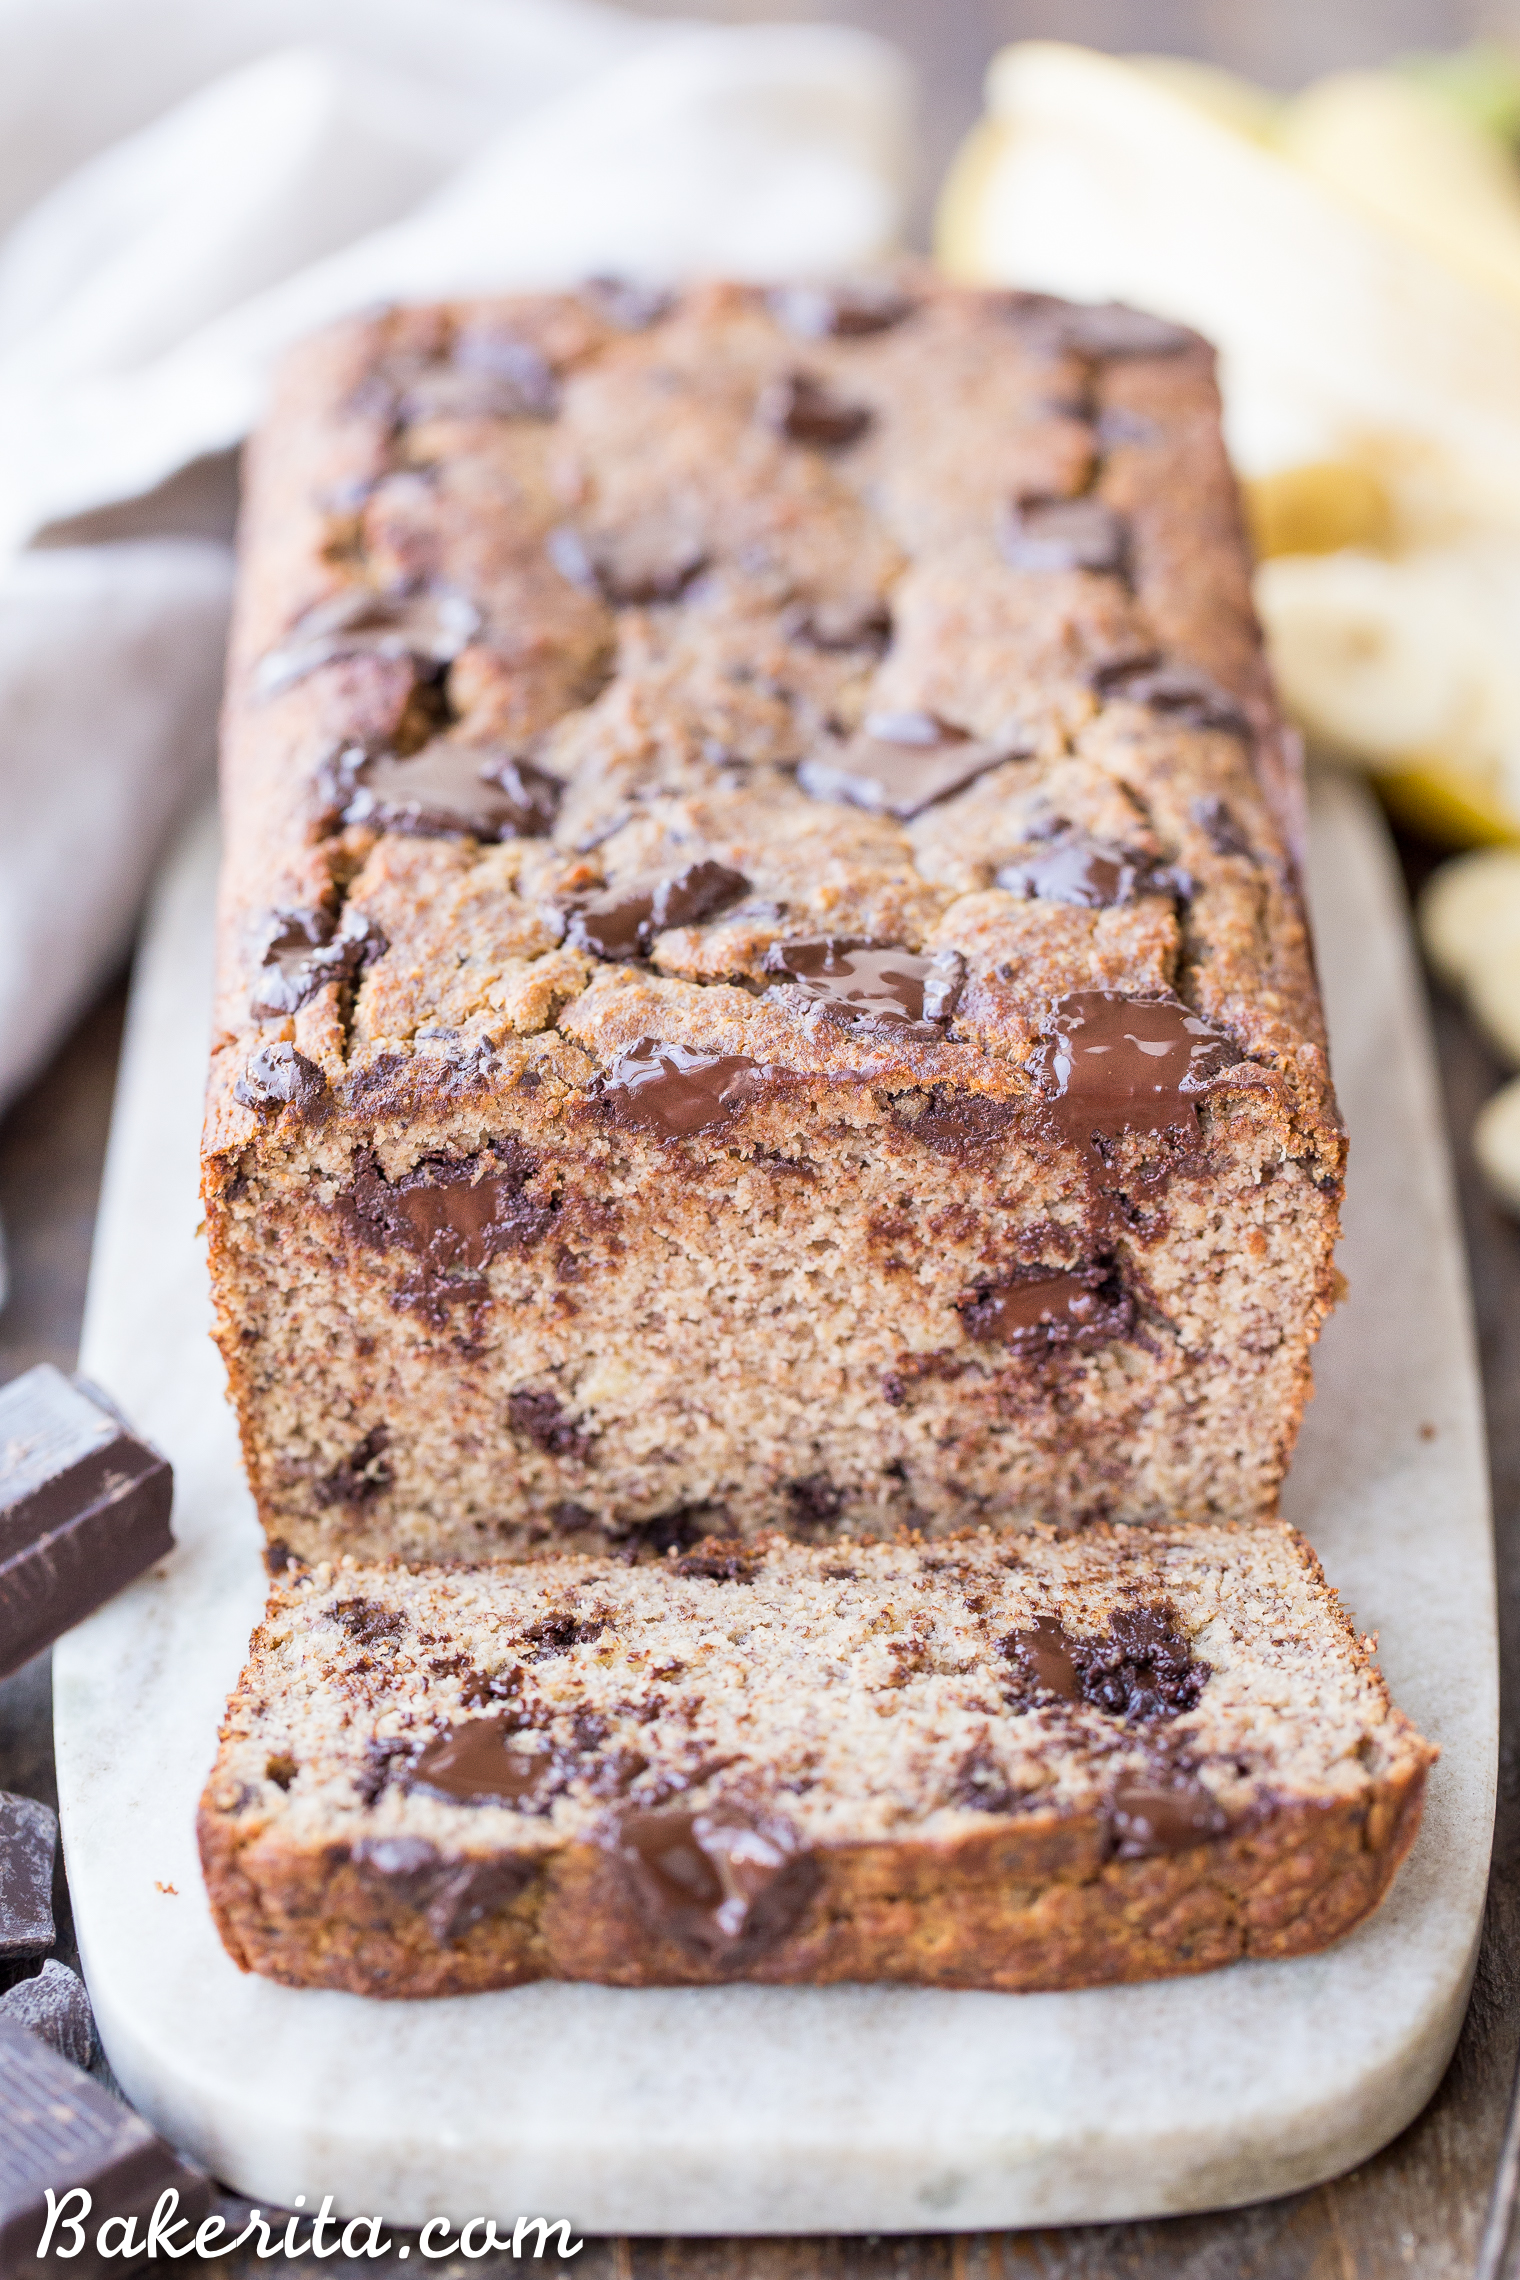 This Paleo Chocolate Chunk Banana Bread is sweetened only with bananas for a guiltless treat that tastes just like traditional banana bread! This is easy recipe you'll come back to again and again. This paleo banana bread is also gluten-free, grain free, and sugar-free.